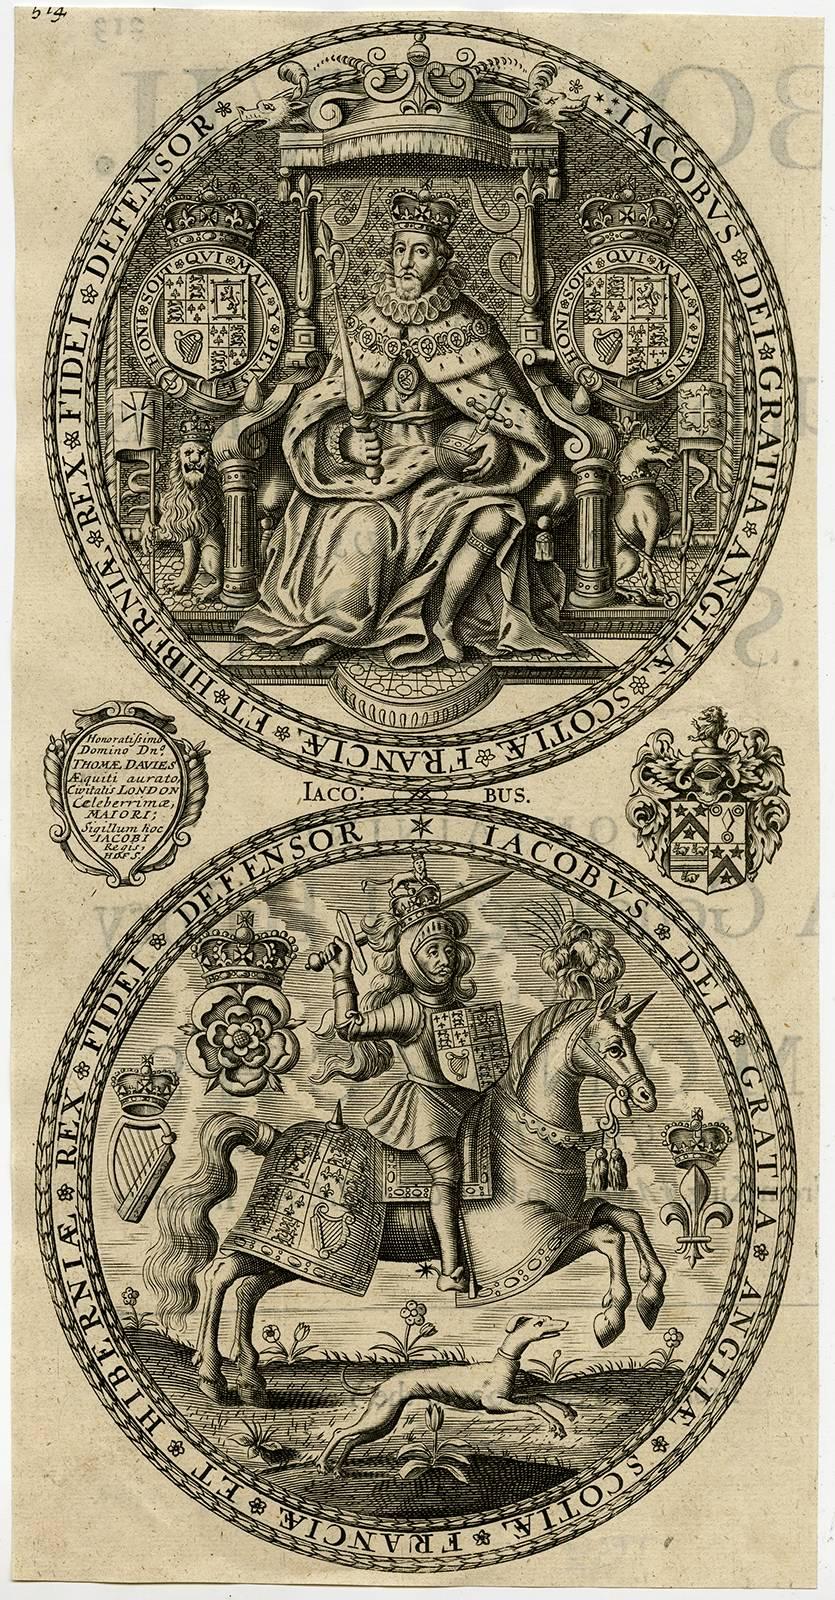 Collection of four print with depictions of English royal seals.  - Print by Unknown